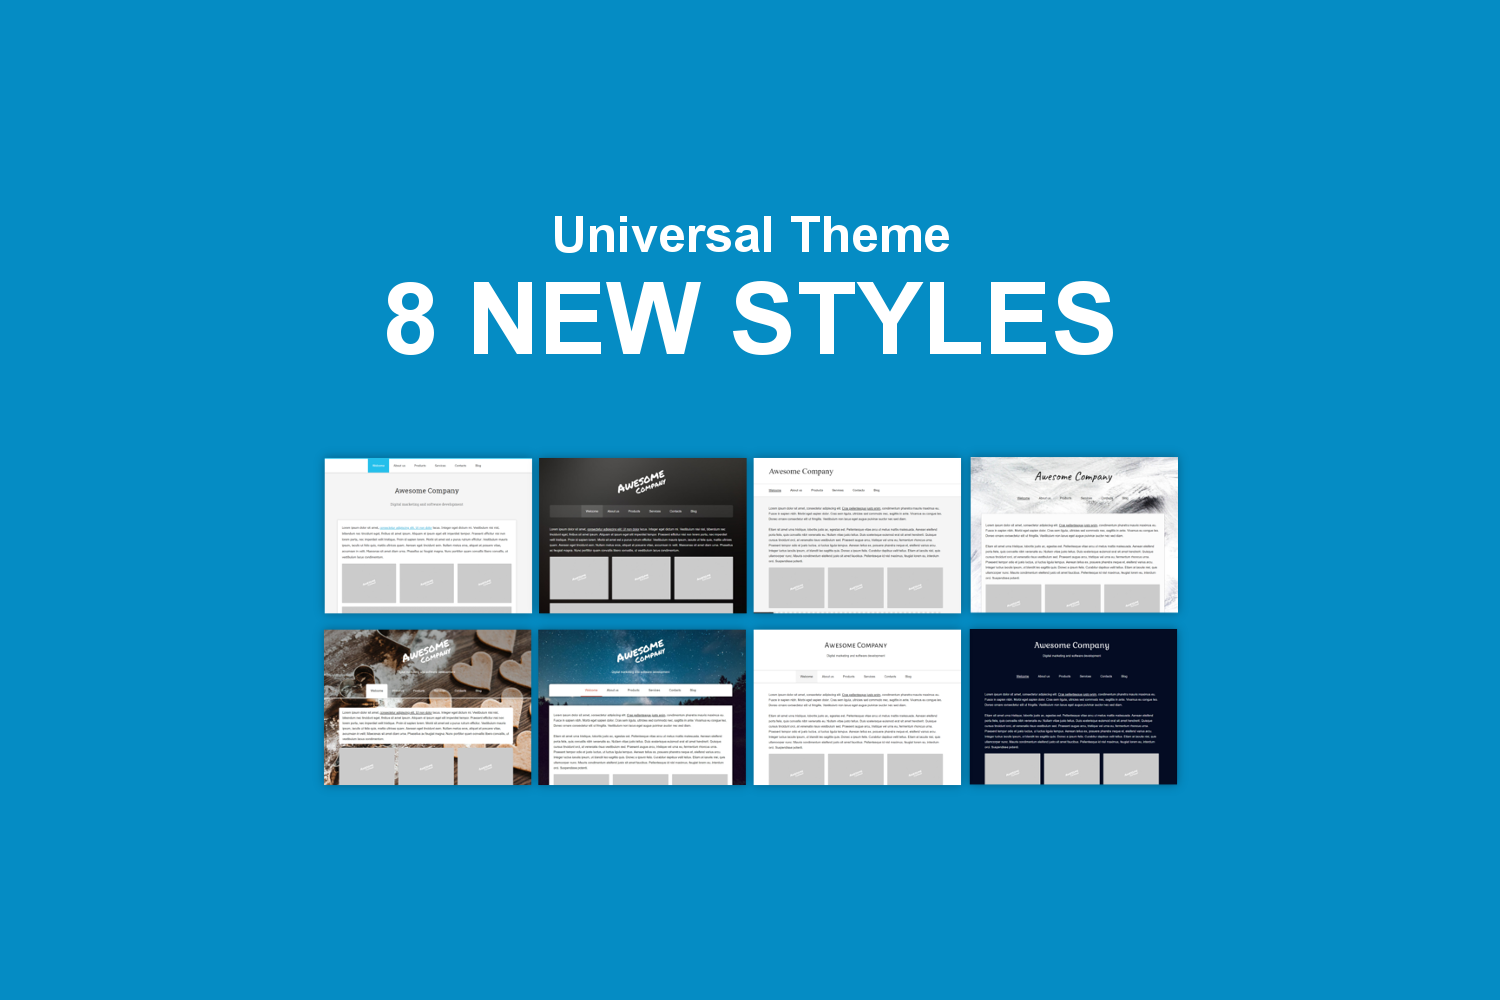 8 new styles for the Universal theme